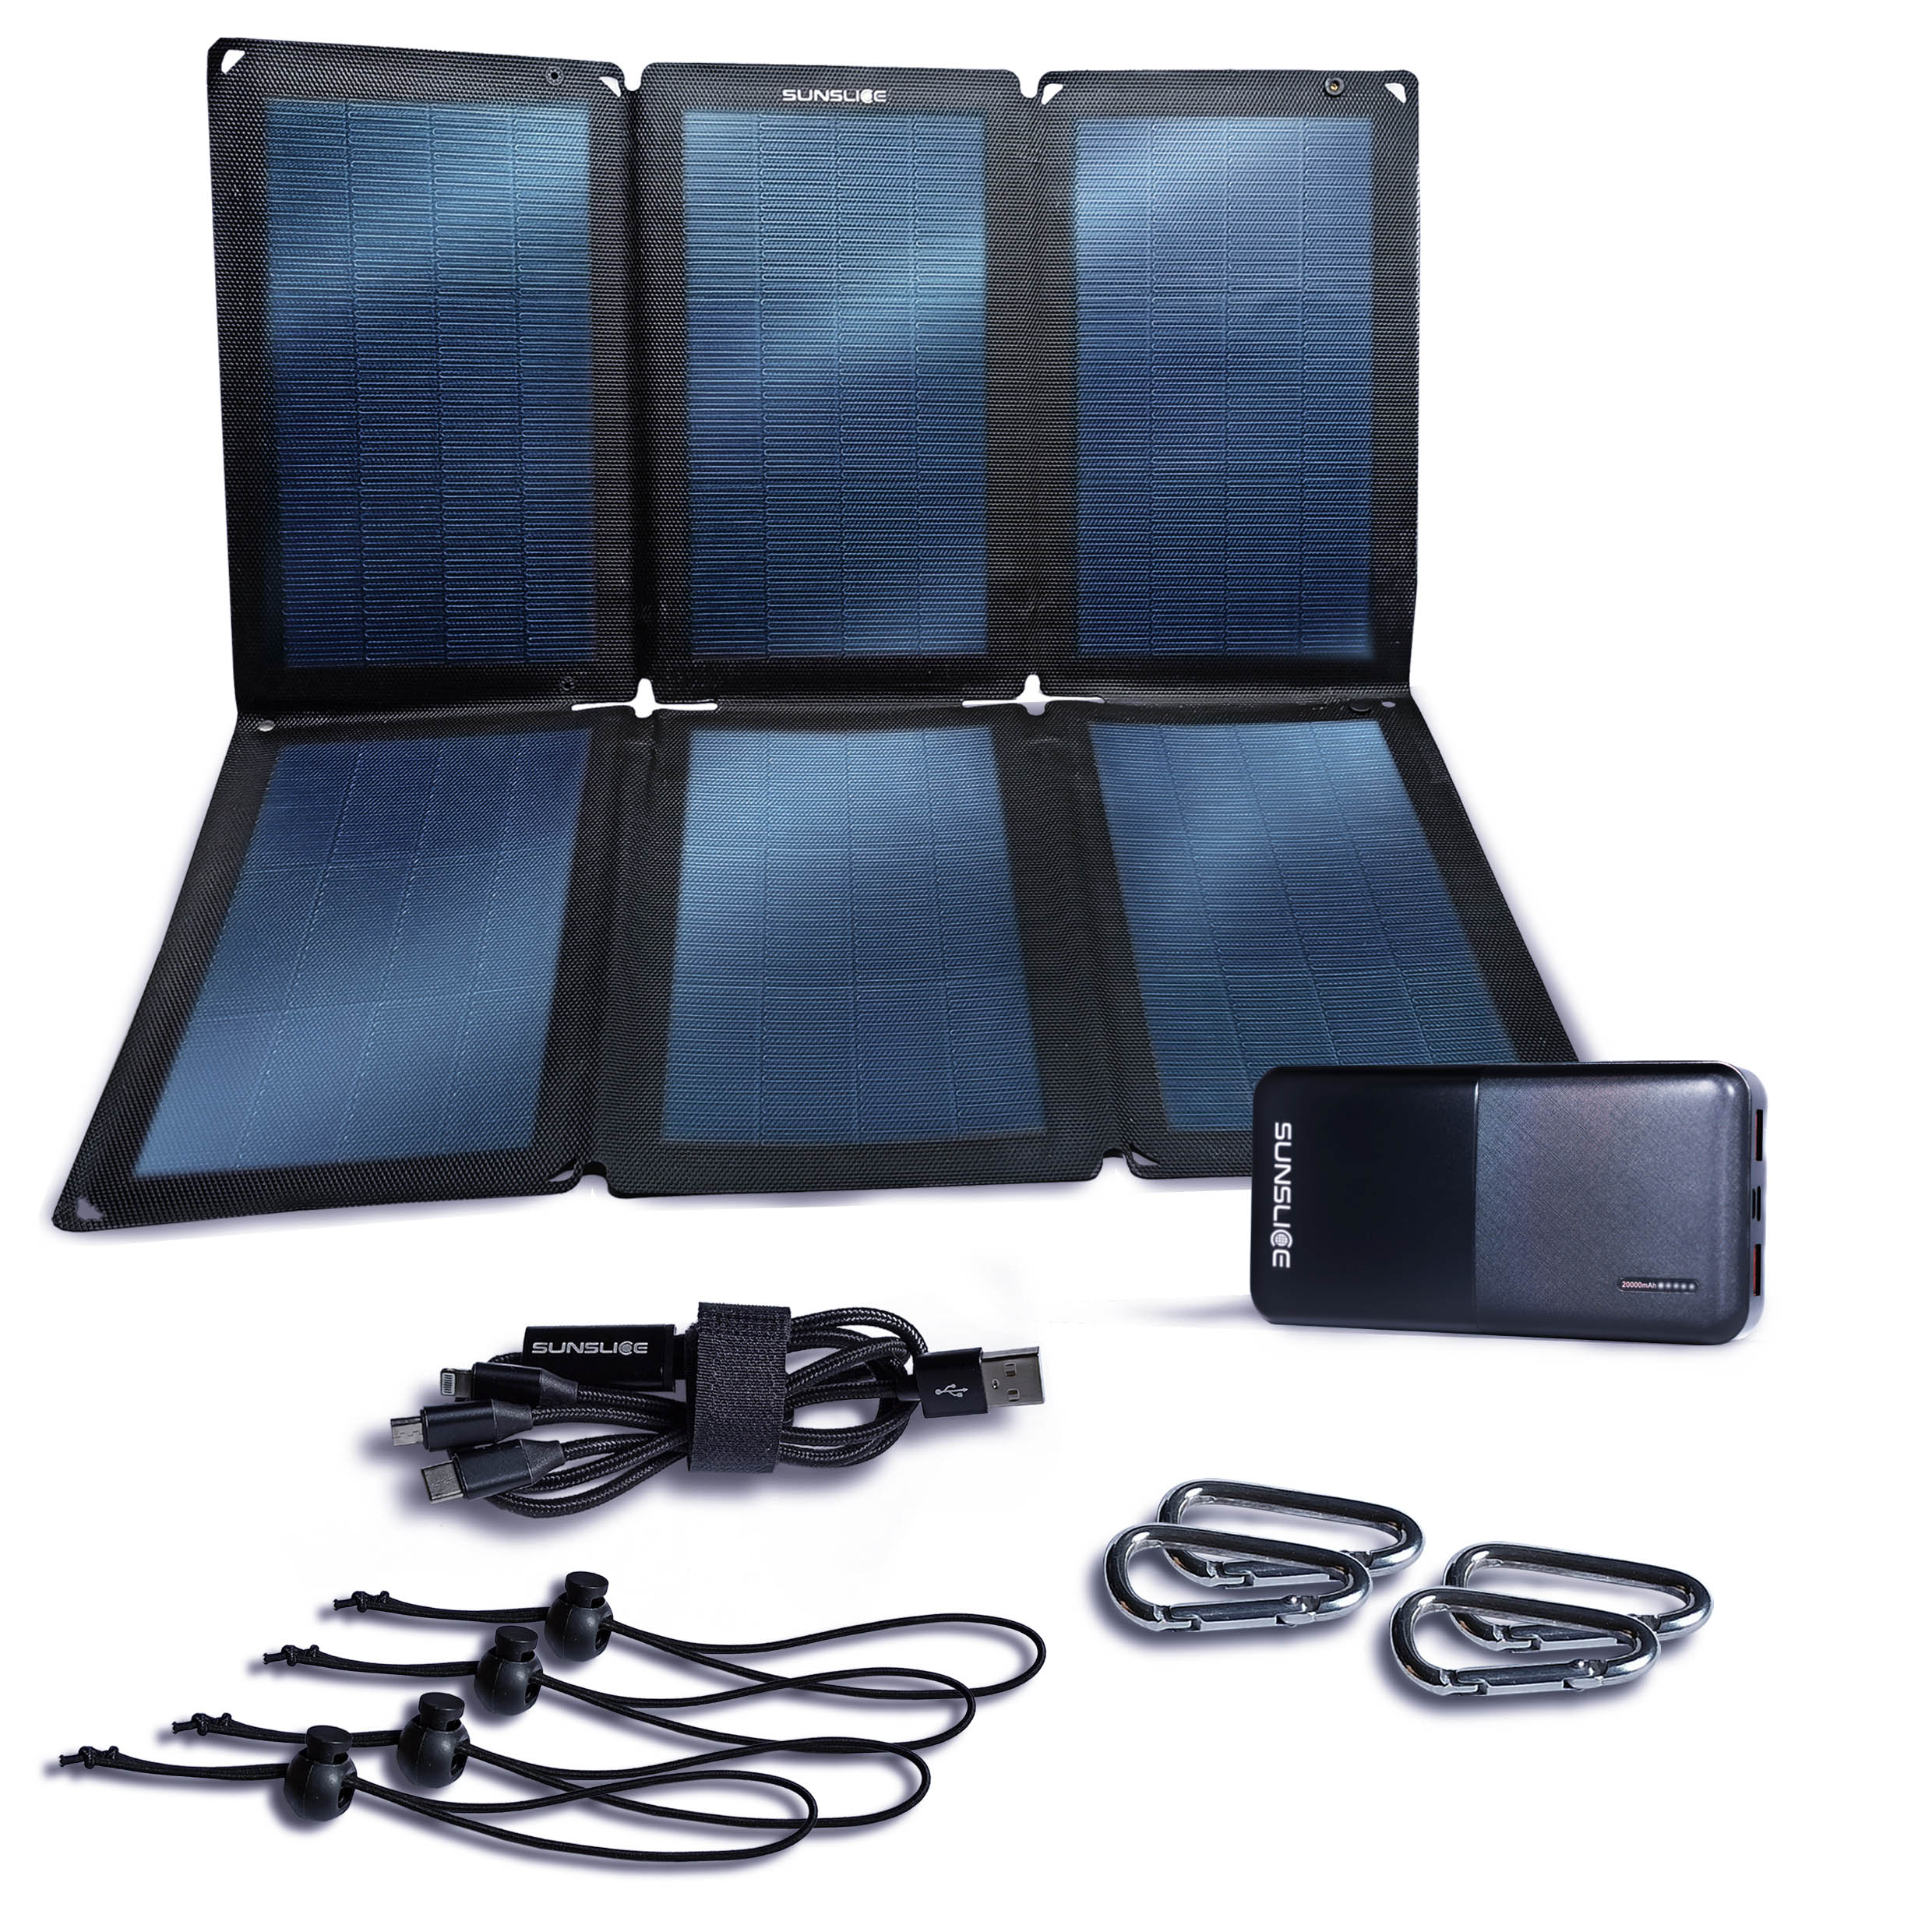 Portable solar panel for camping & backpacking - Fusion 48W | Sunslice